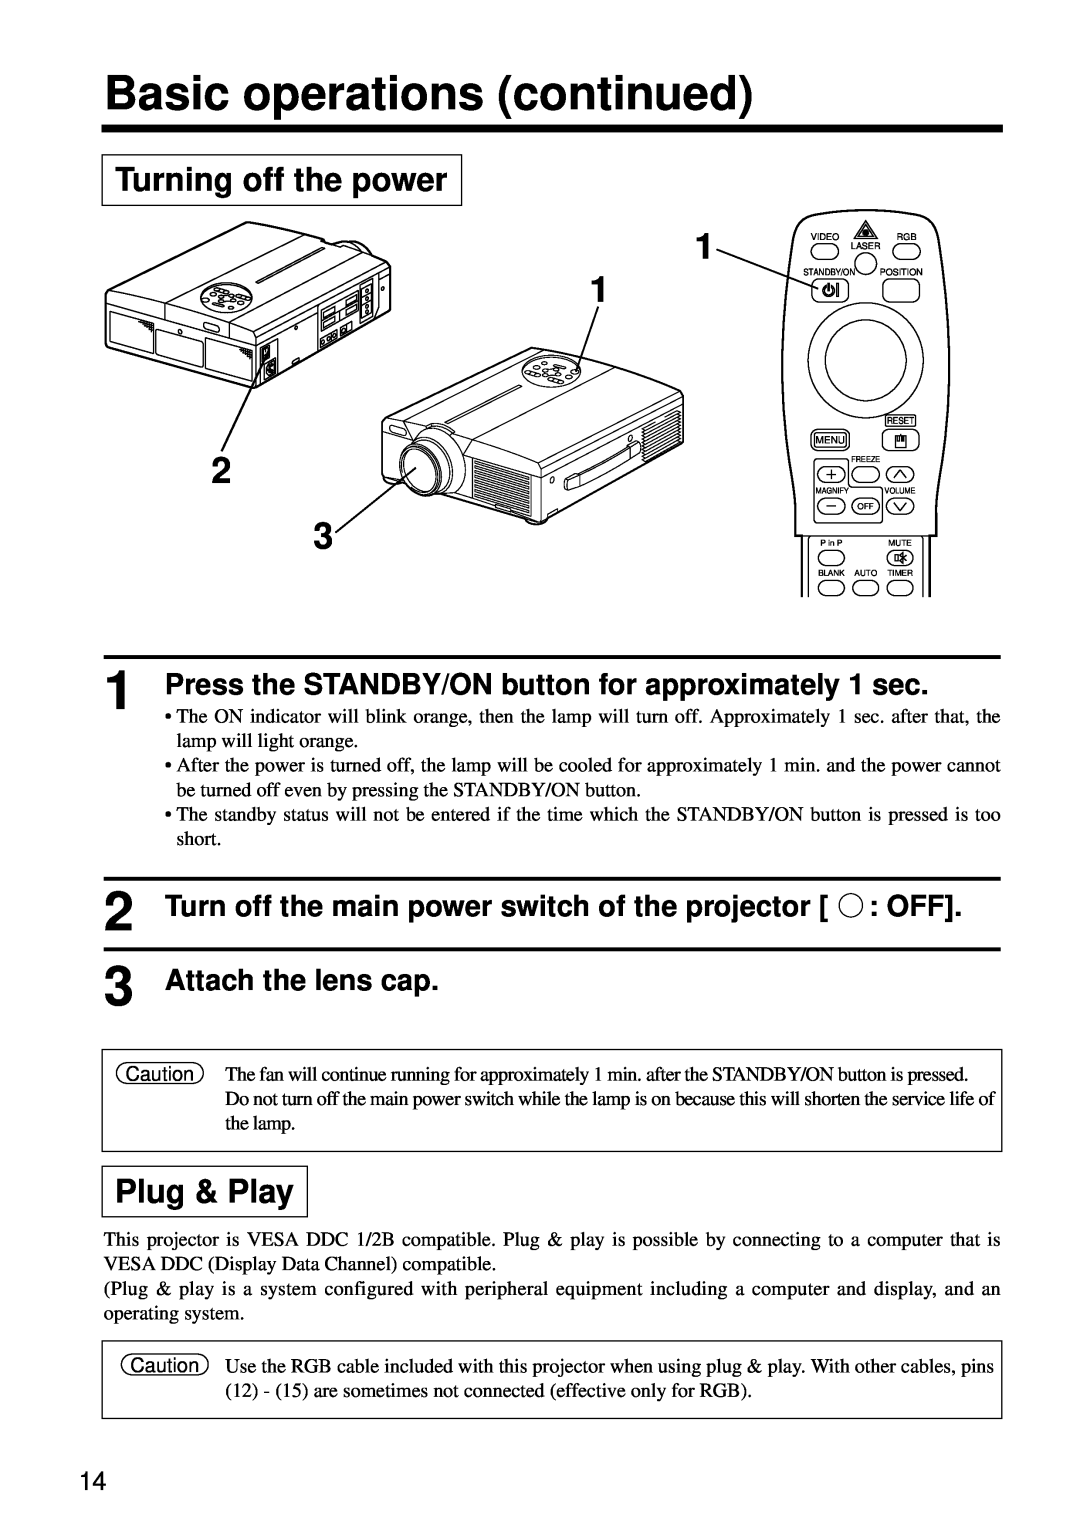 Hitachi CP-S860W user manual Basic operations continued, Turning off the power, Plug & Play, Attach the lens cap 